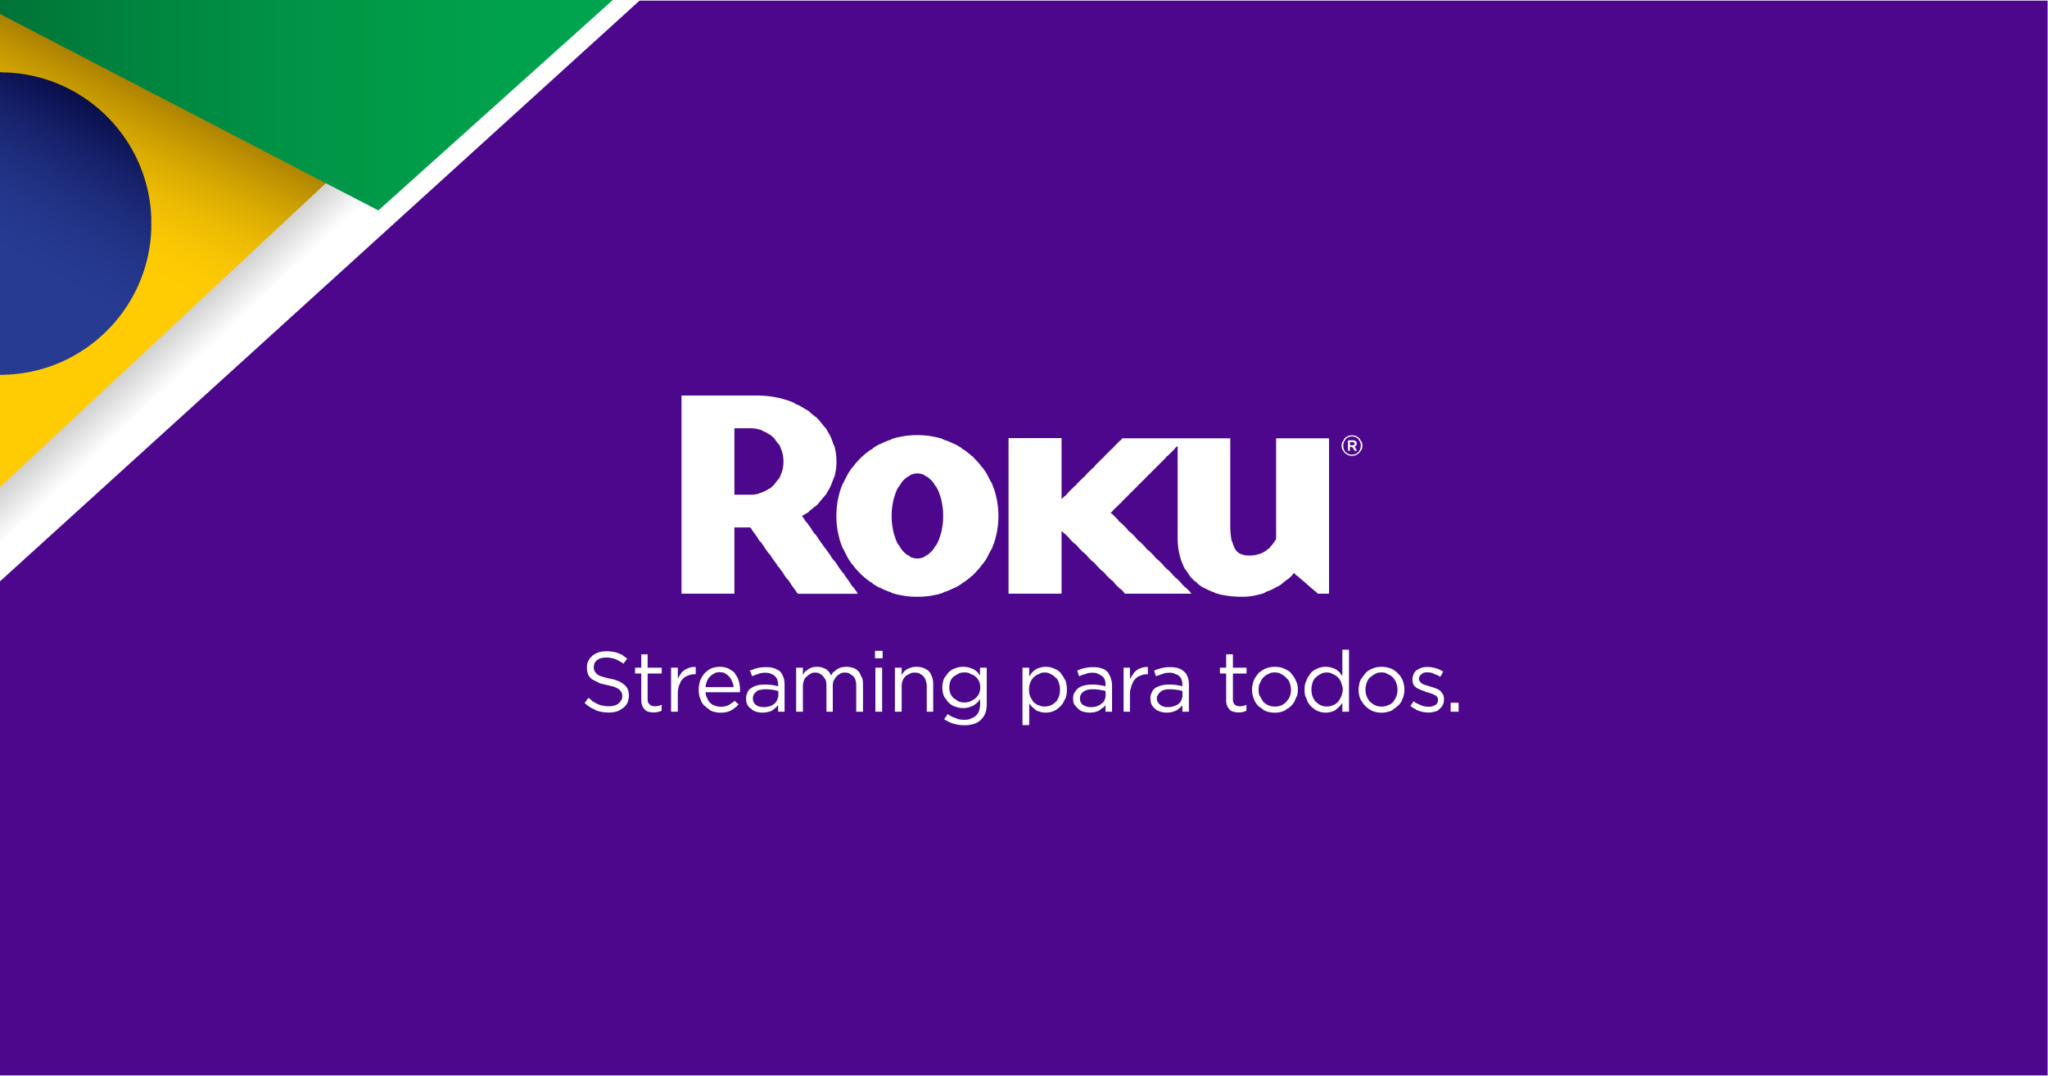 Roku Launches Globoplay Channel & is Now Available in Brazil